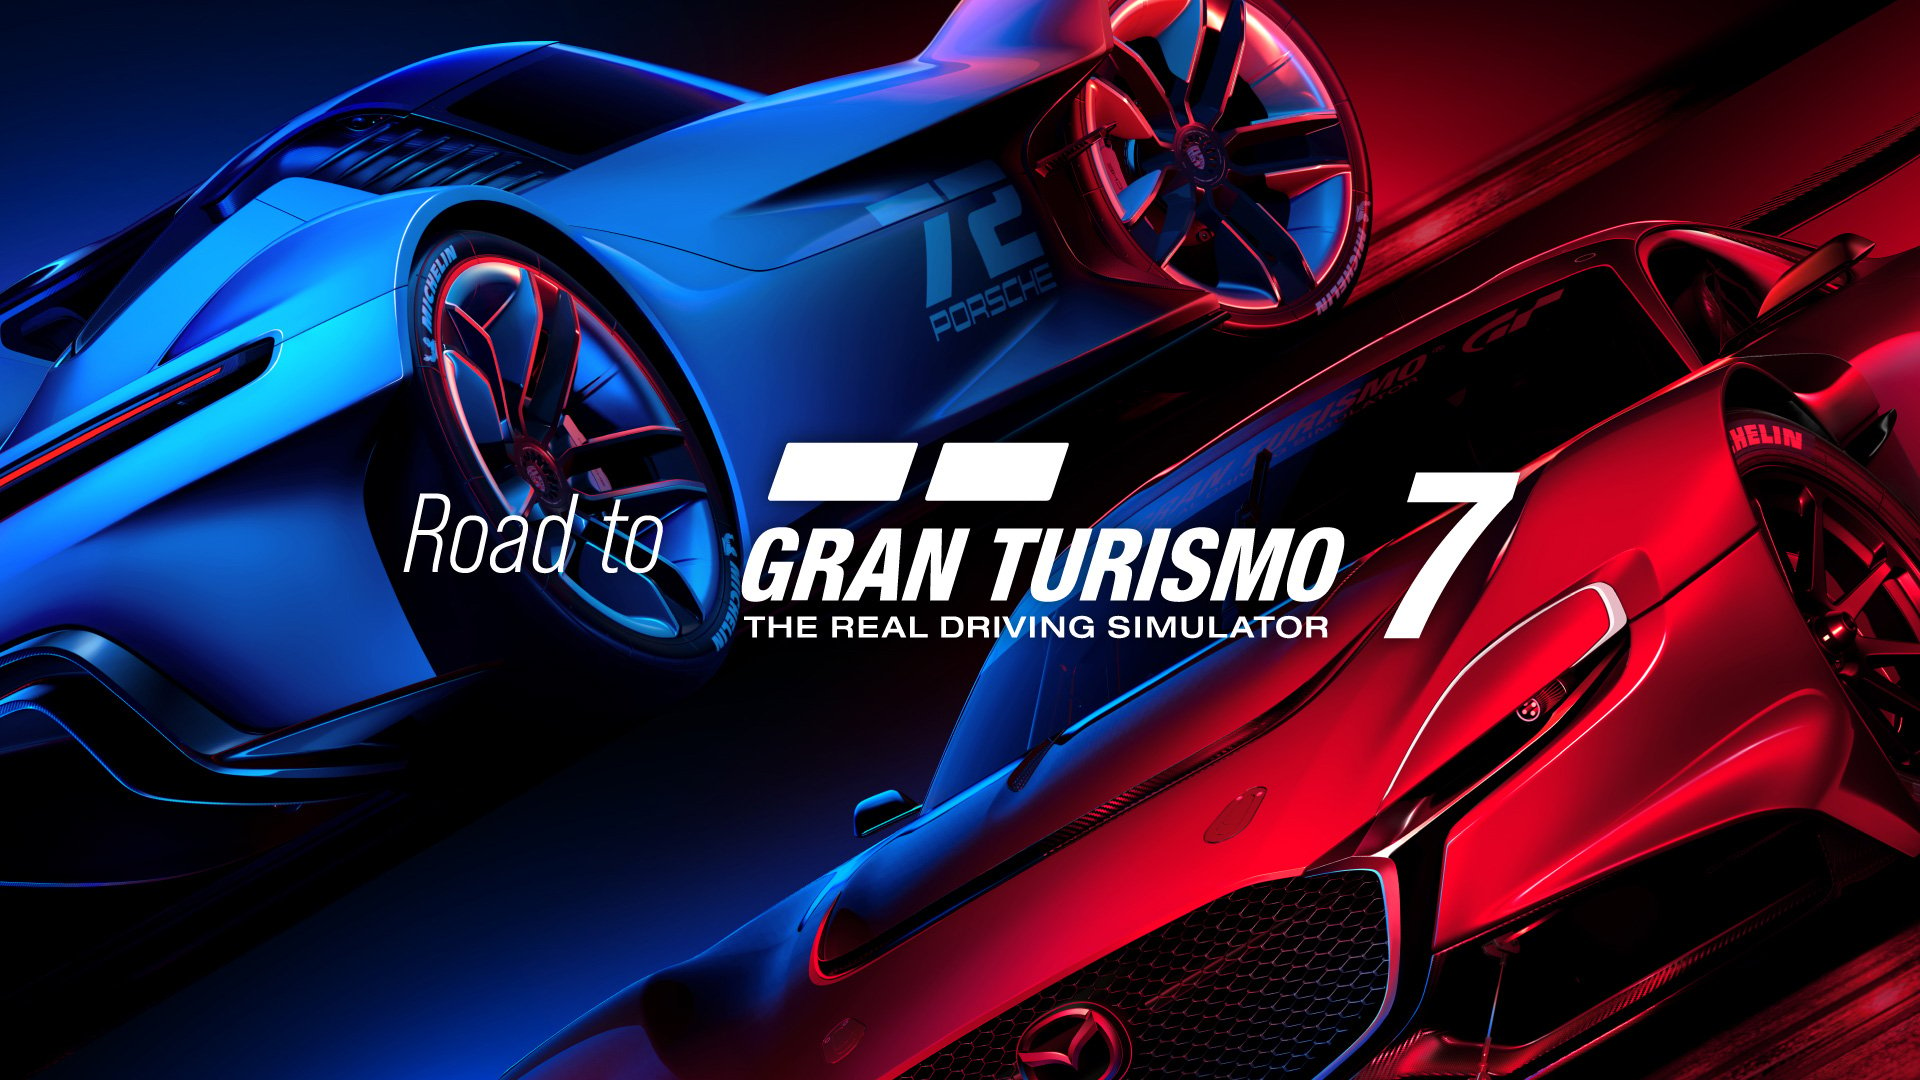 Gran Turismo 7 Spec II Features Seven New Cars and 4-Player Split Screen